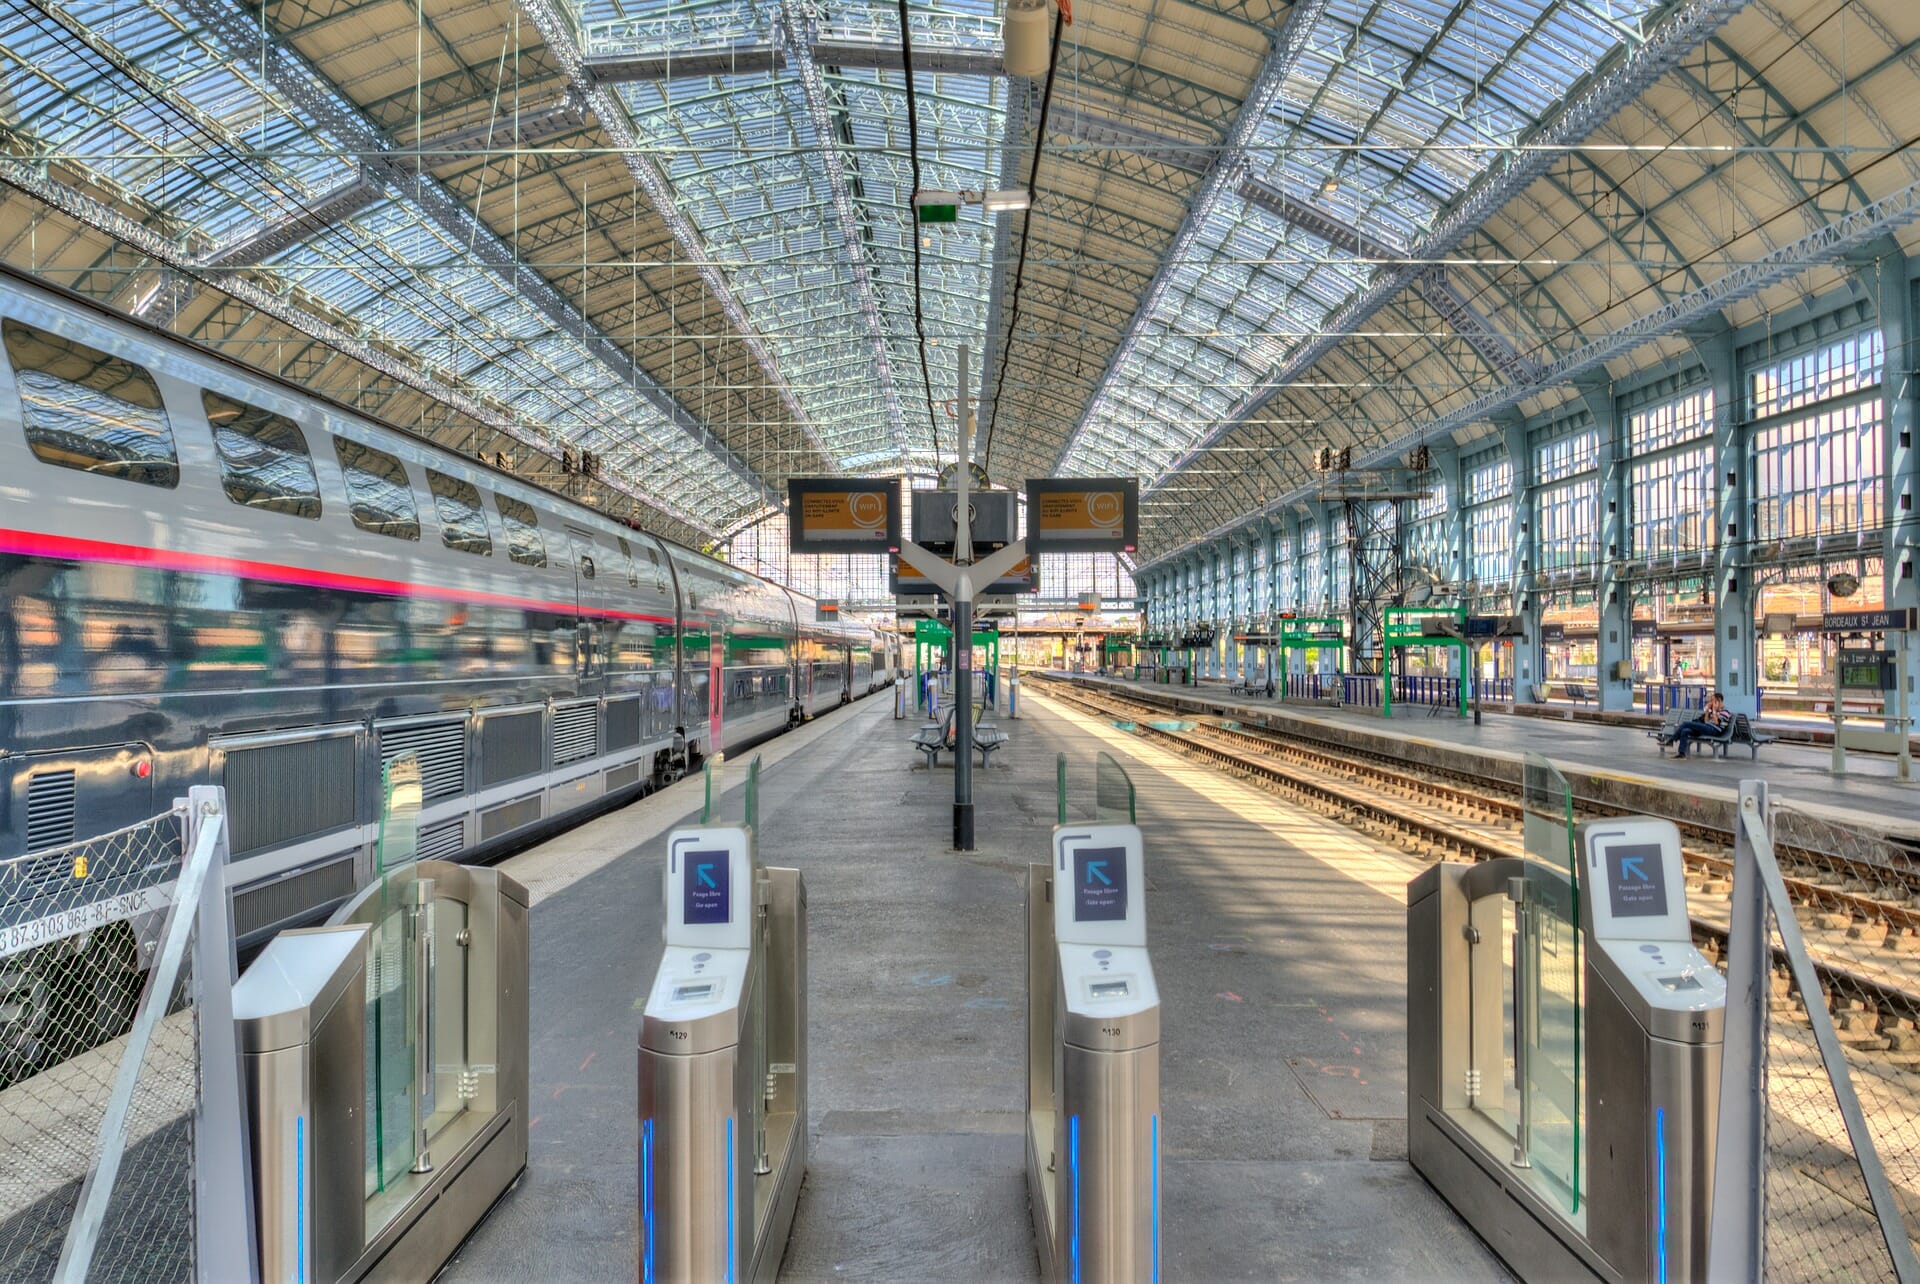 Train station with two trains on stand by at the Bordeaux station